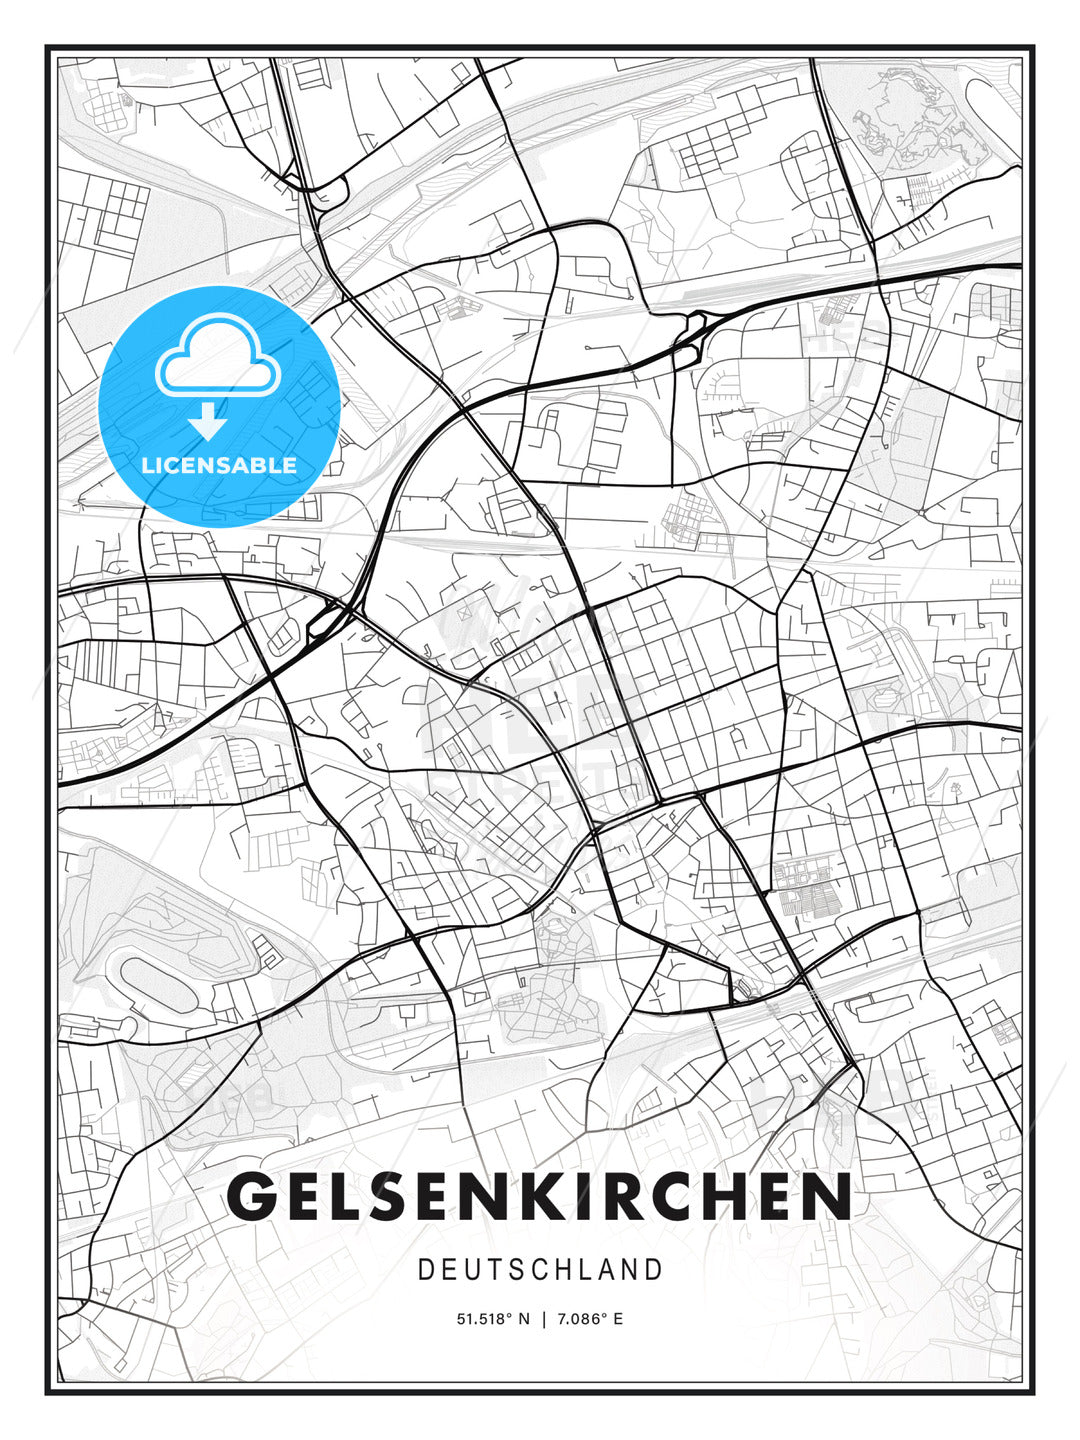 Gelsenkirchen, Germany, Modern Print Template in Various Formats - HEBSTREITS Sketches